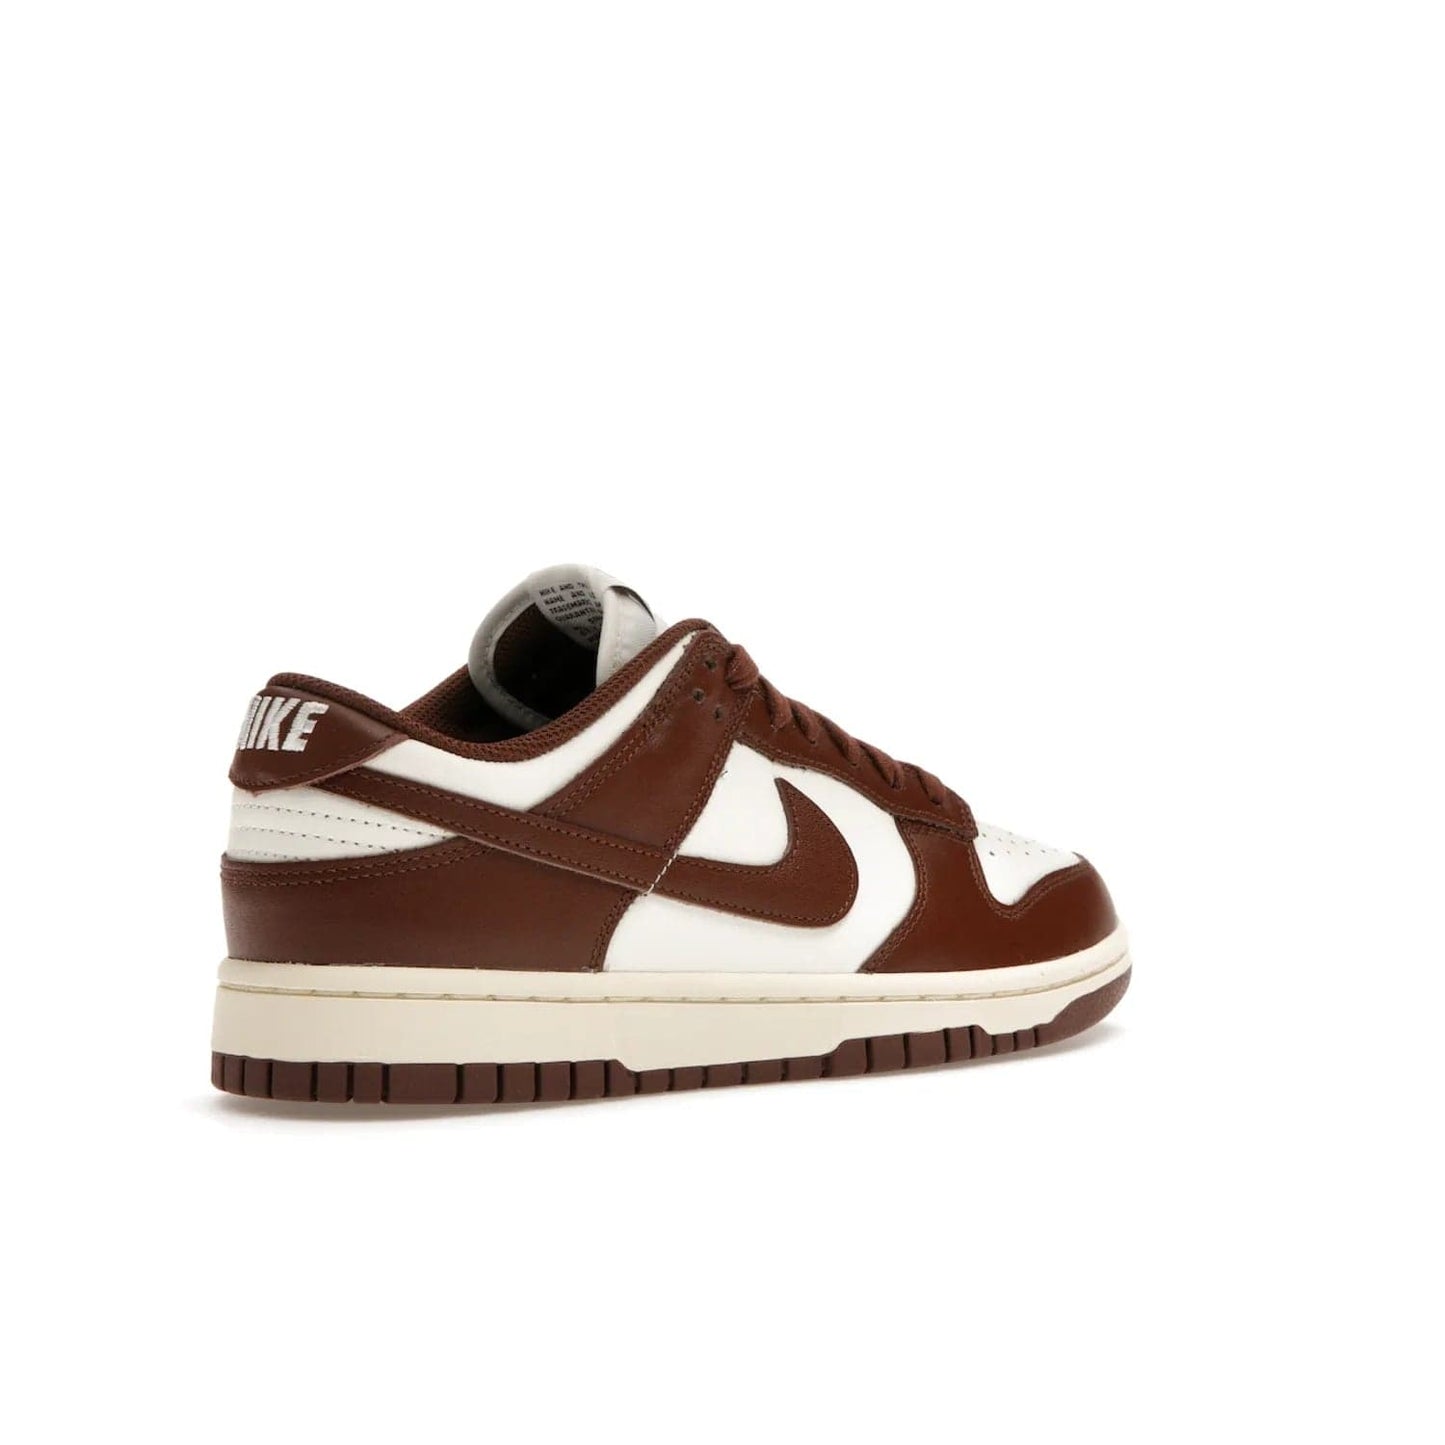 Nike Dunk Low Cacao Wow (Women's) - Image 33 - Only at www.BallersClubKickz.com - Revised
Get the Nike Dunk Low Cacao Wow and make a statement! Plush leather and a cool Cacao Wow finish bring together a unique mix of comfort and fashion that will turn heads. Boosted with a Coconut Milk hue. Shop today.